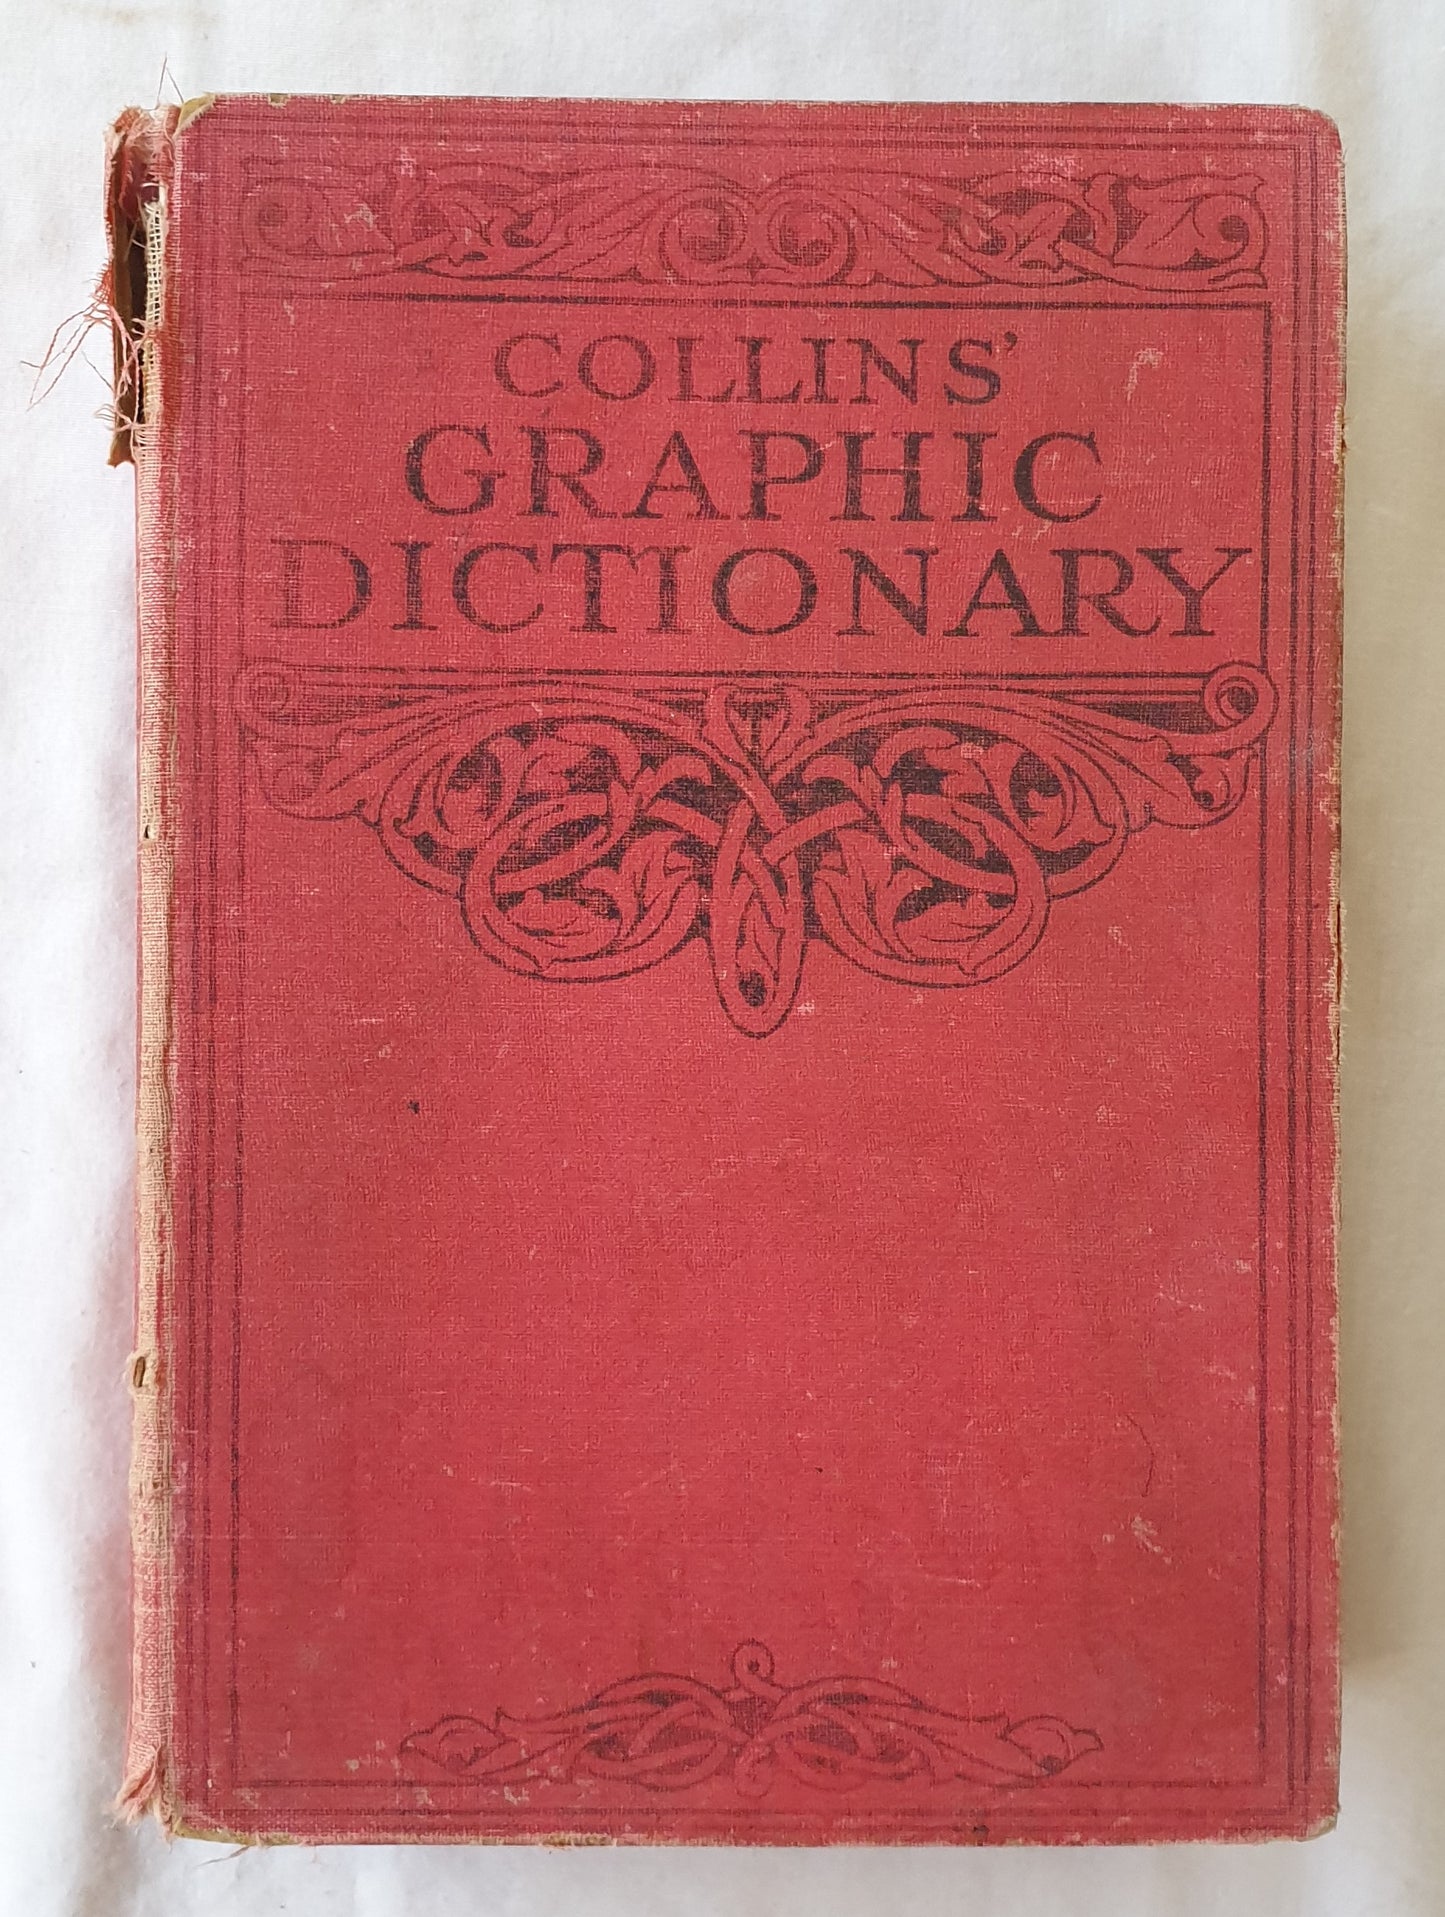 Collins’ Graphic Dictionary  Etymological, Explanatory, and Pronouncing  New Revised Edition